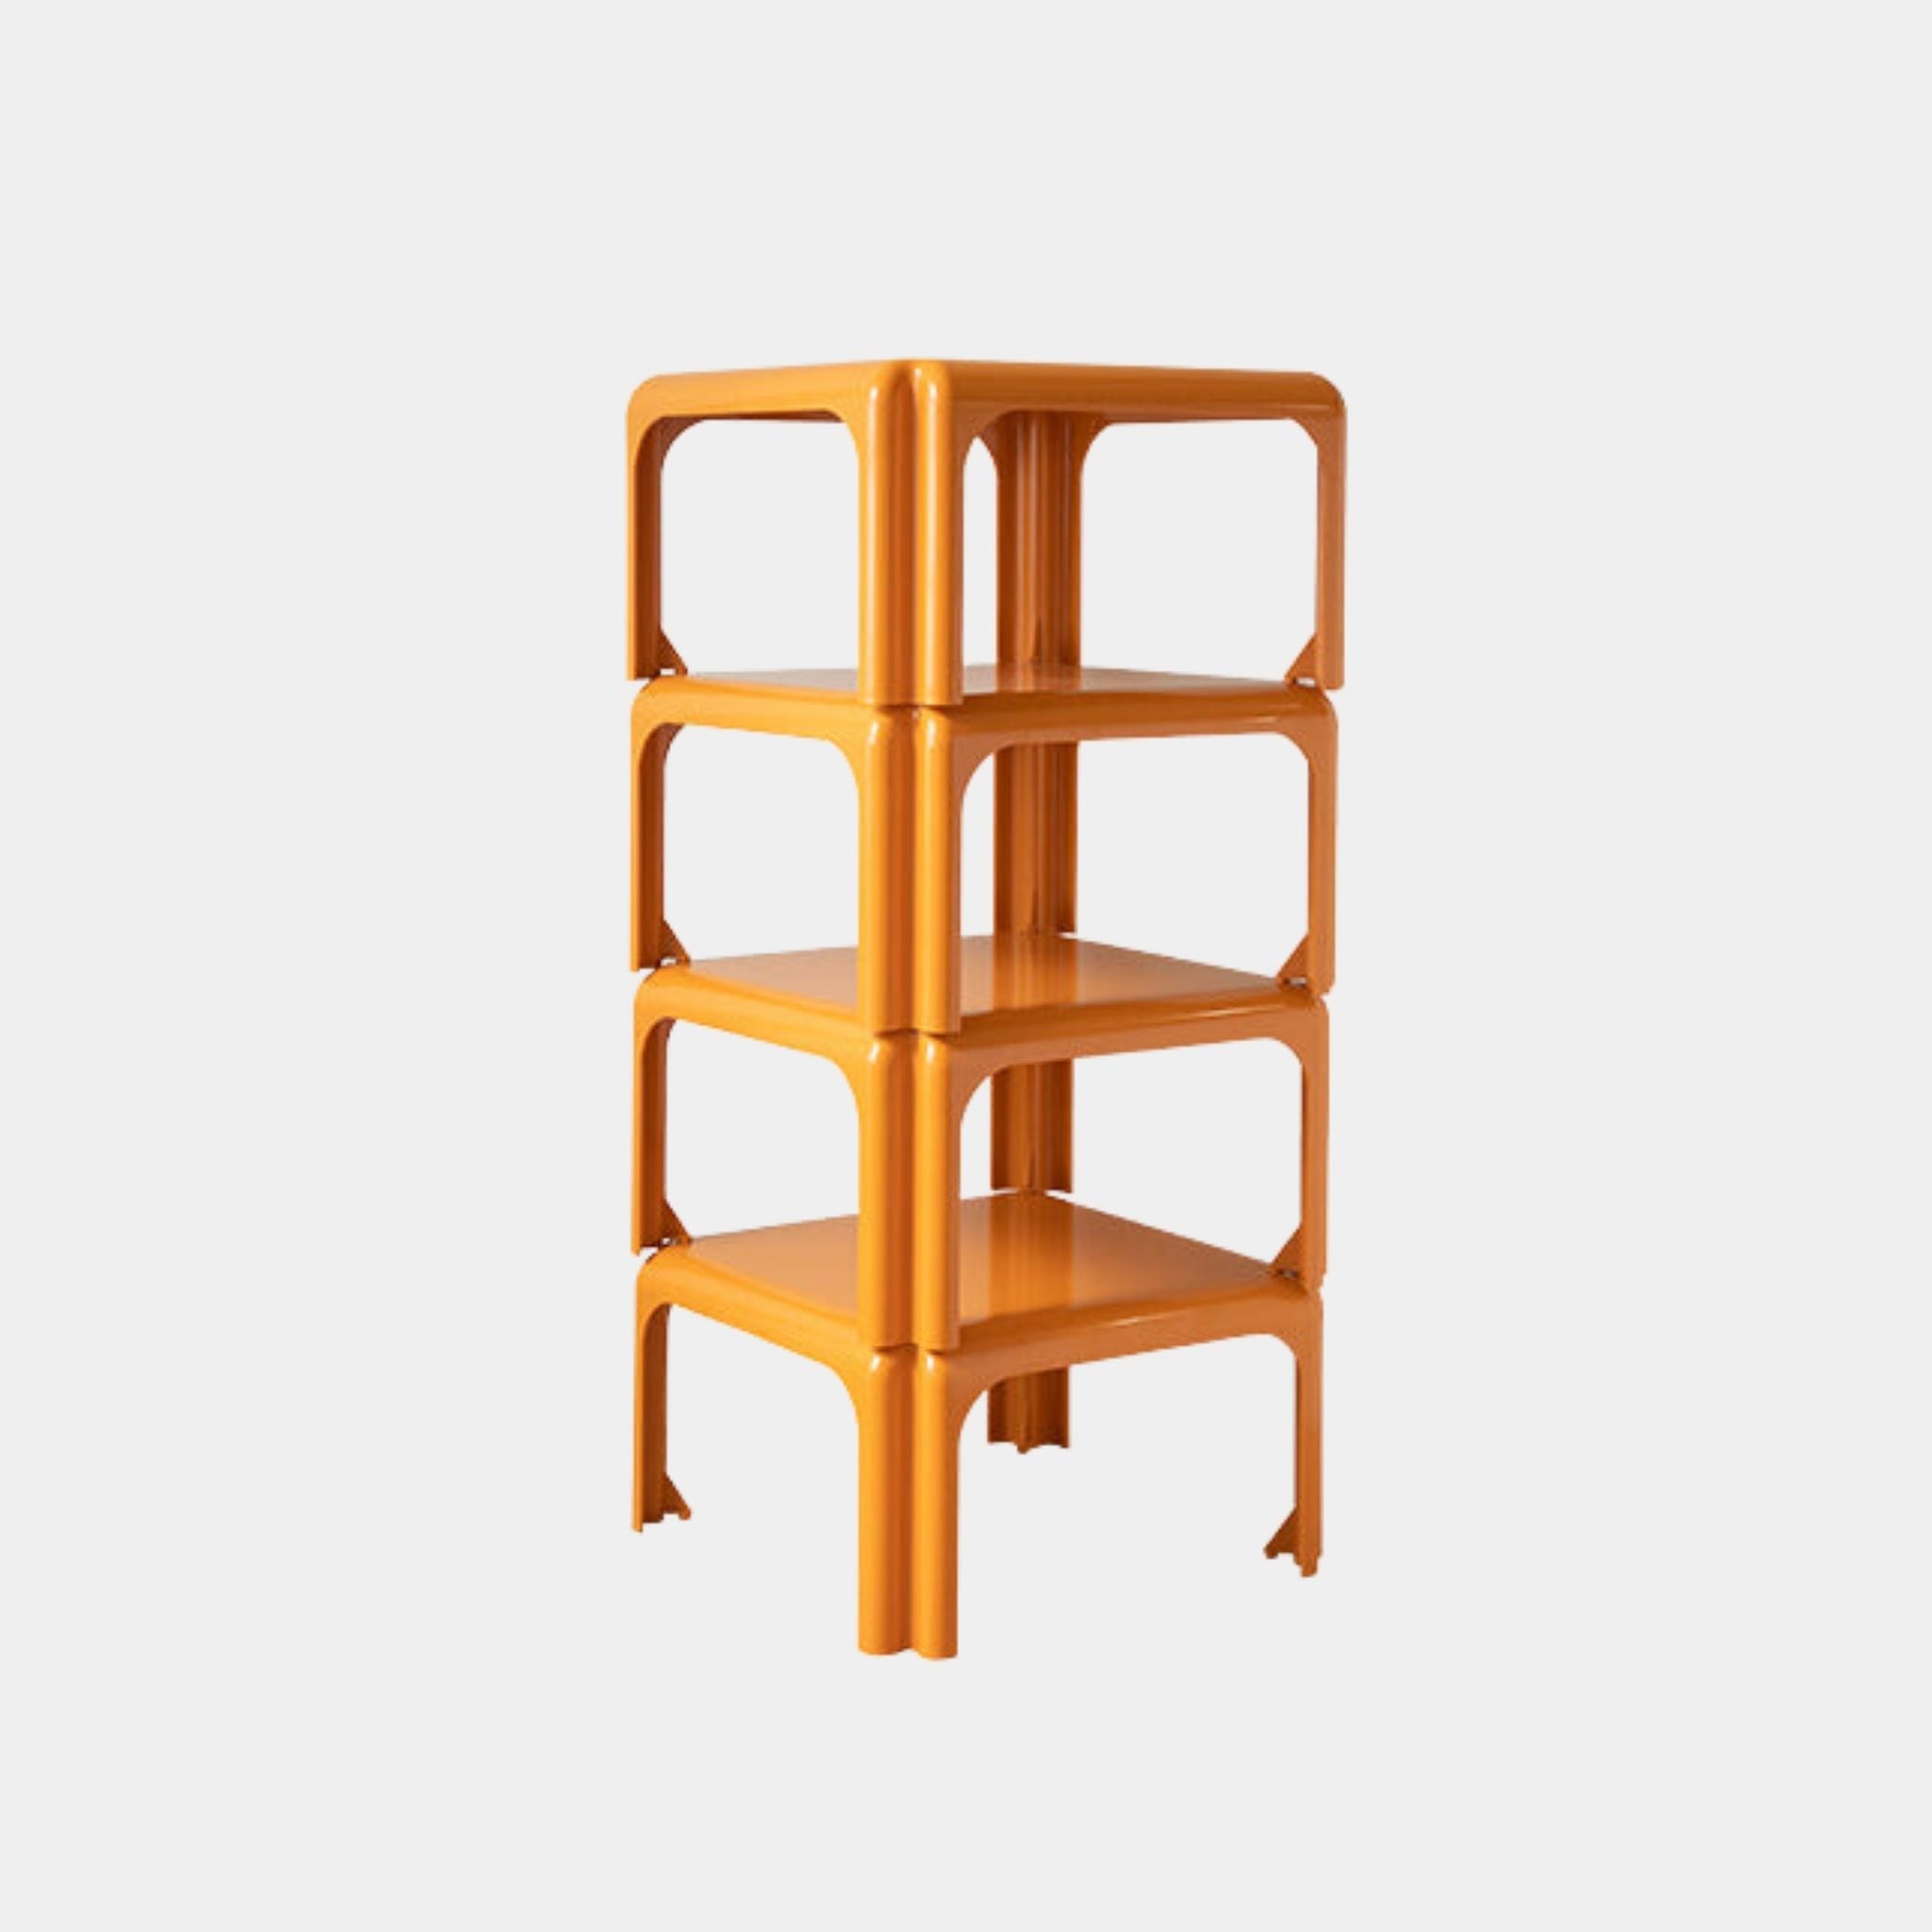 Elaine Stackable Table - The Feelter